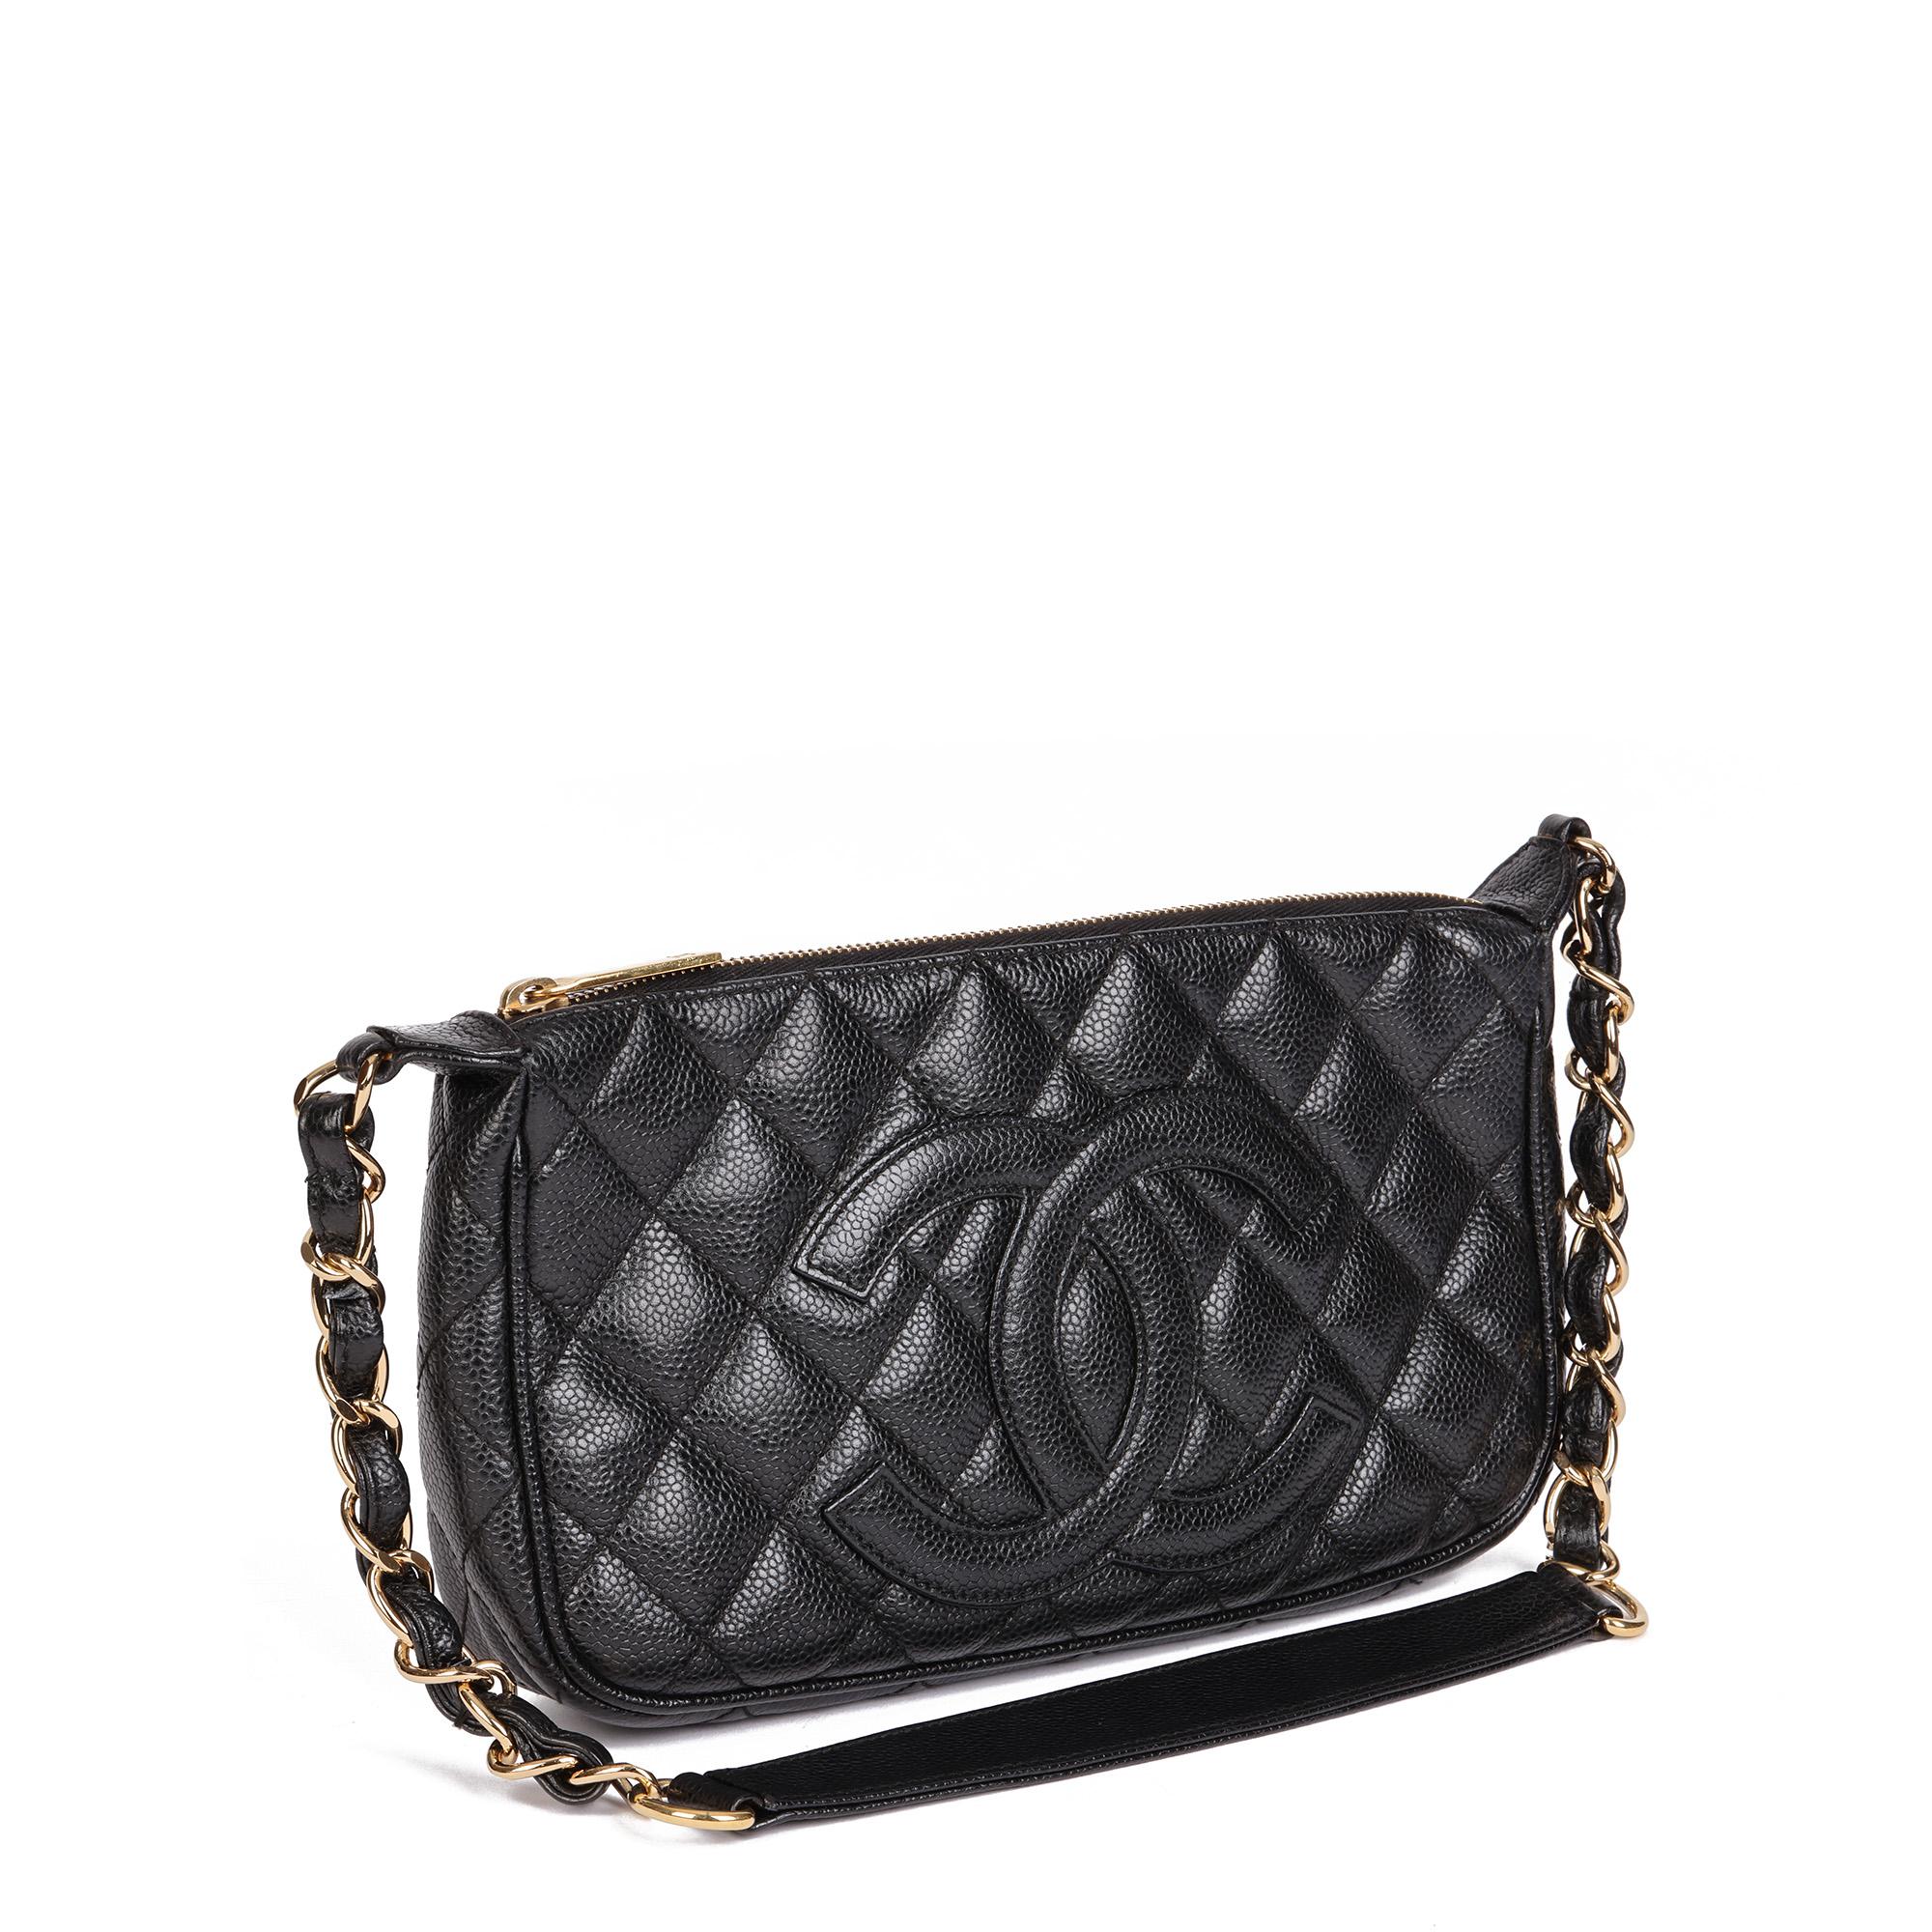 CHANEL
Black Quilted Caviar Leather Vintage Timeless Pochette

Xupes Reference: HB4758
Serial Number: 7616582
Age (Circa): 2002
Accompanied By: Chanel Dust Bag, Care Booklet, Authenticity Card
Authenticity Details: Authenticity Card, Serial Sticker